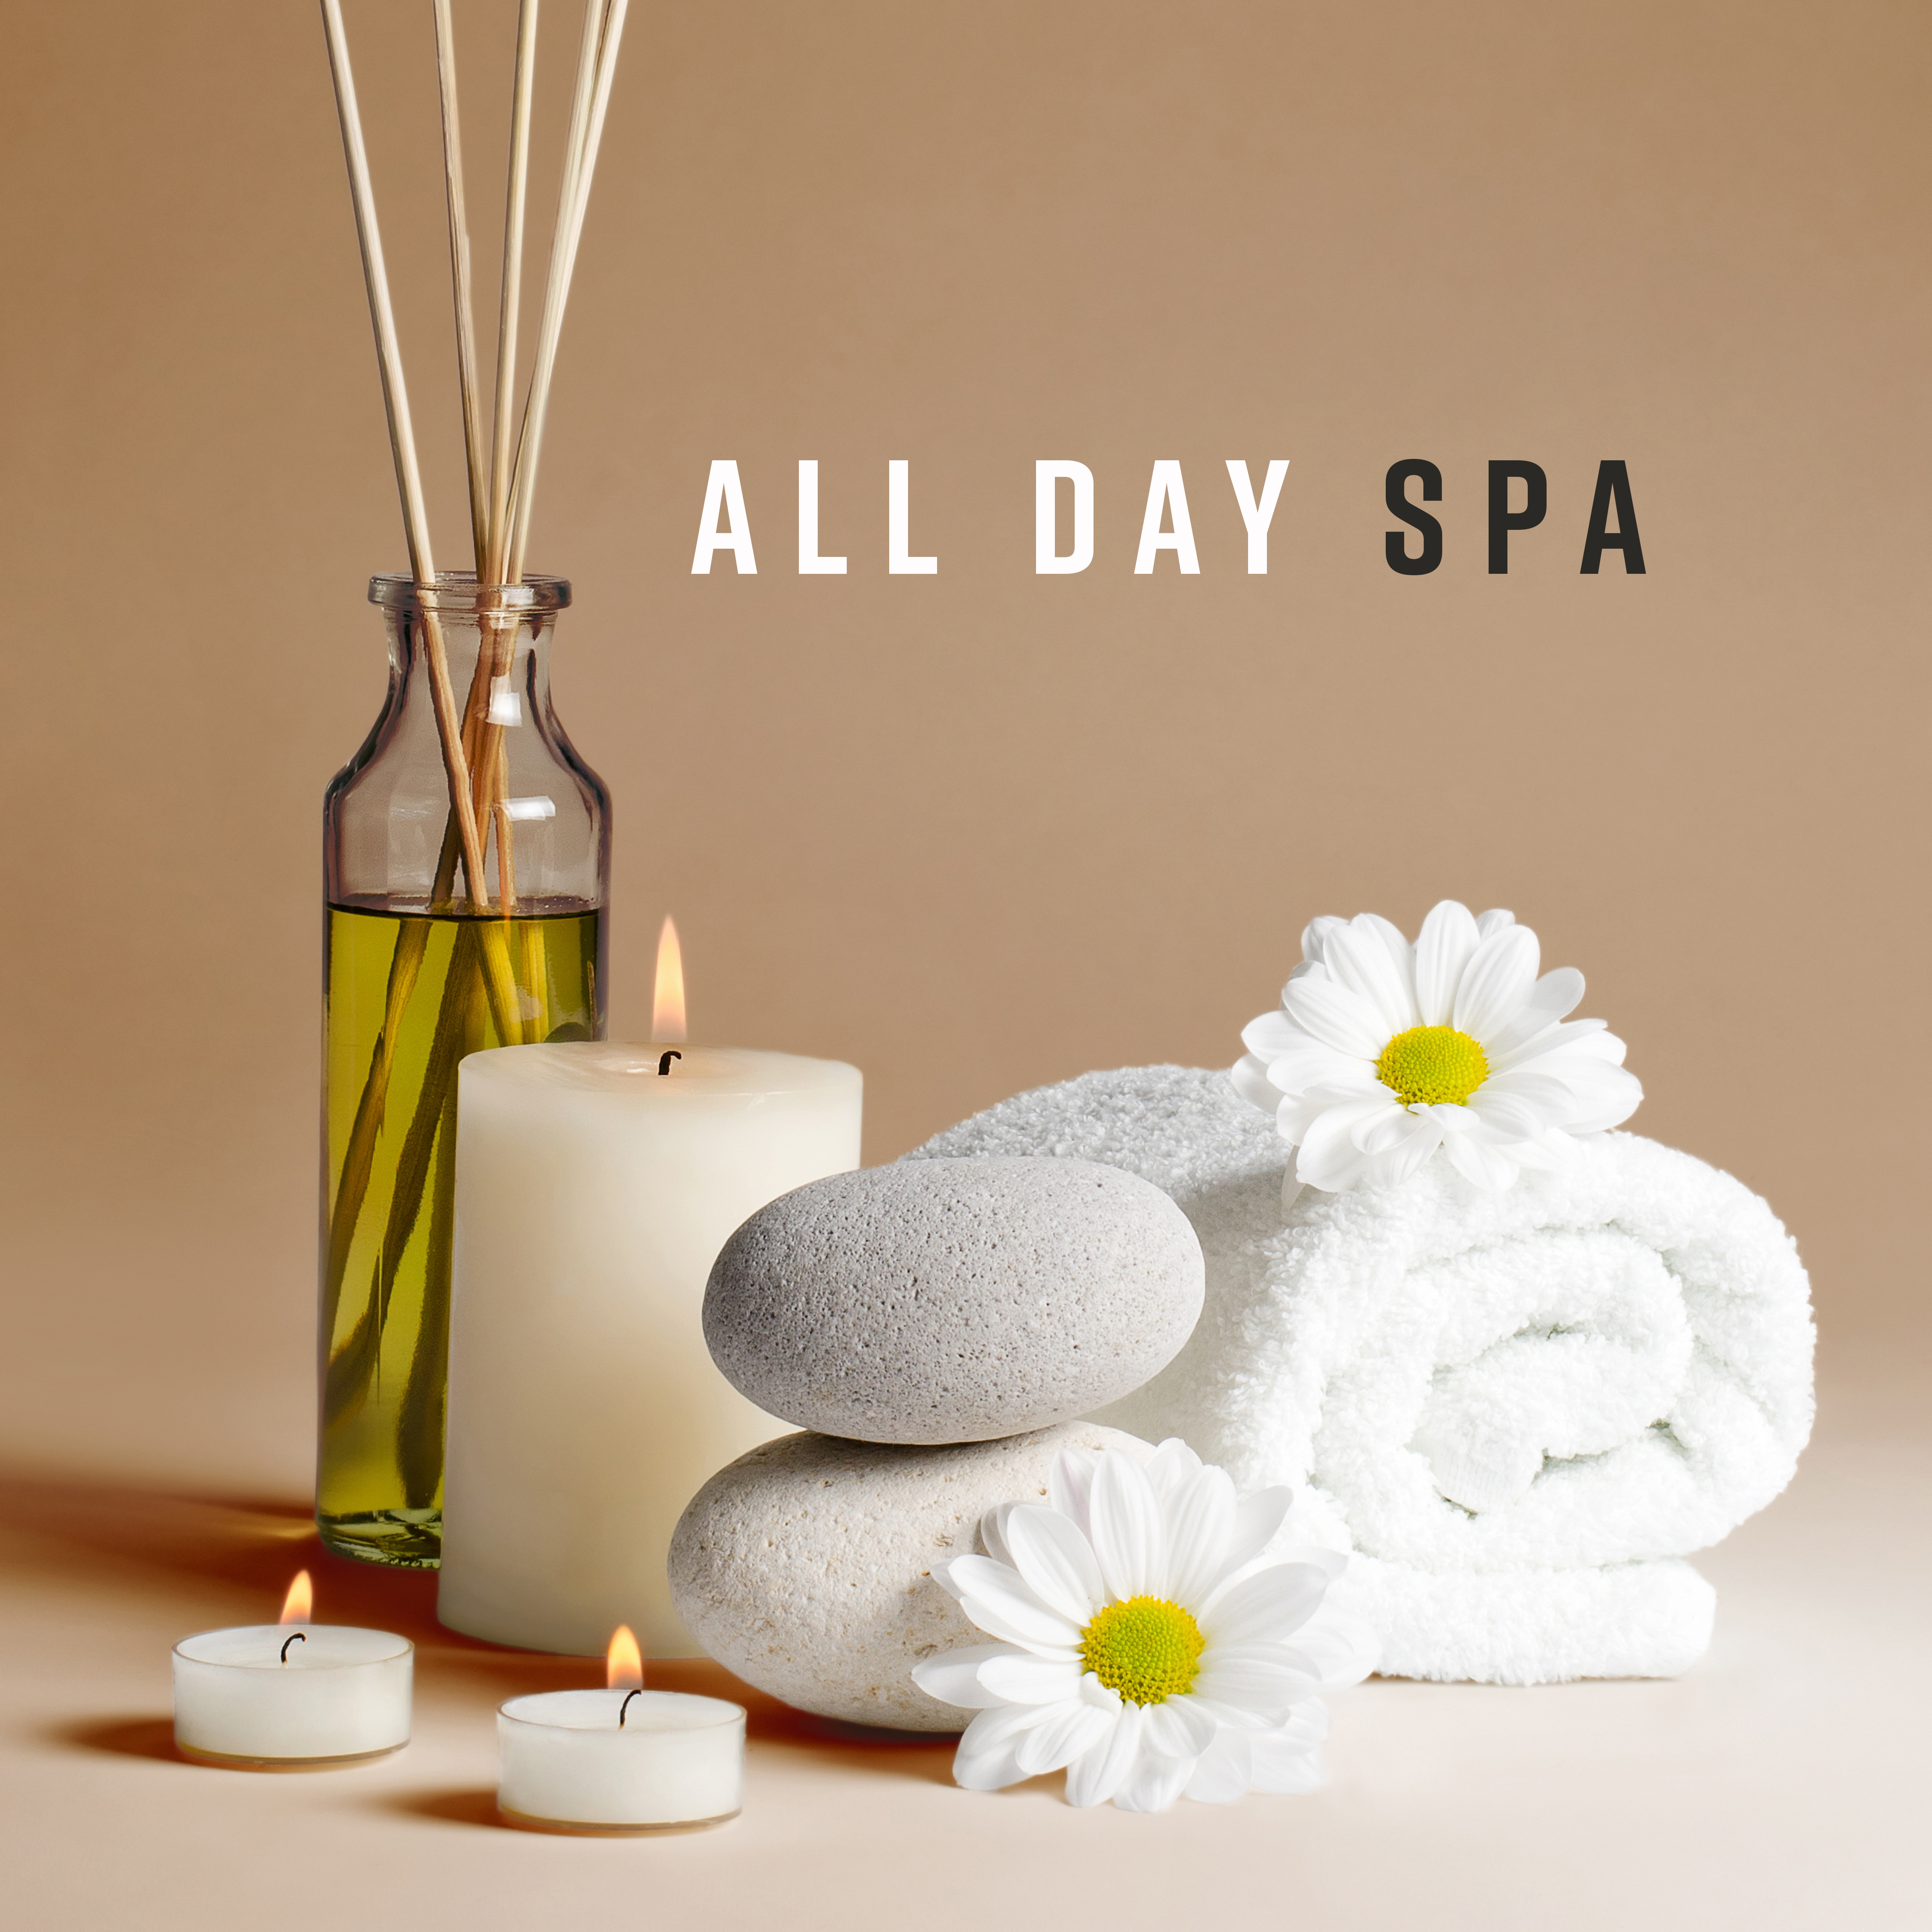 All Day Spa – Musical Background for Beauty Treatments for Your Body, for a Day Only for You, to Relax and Unwind